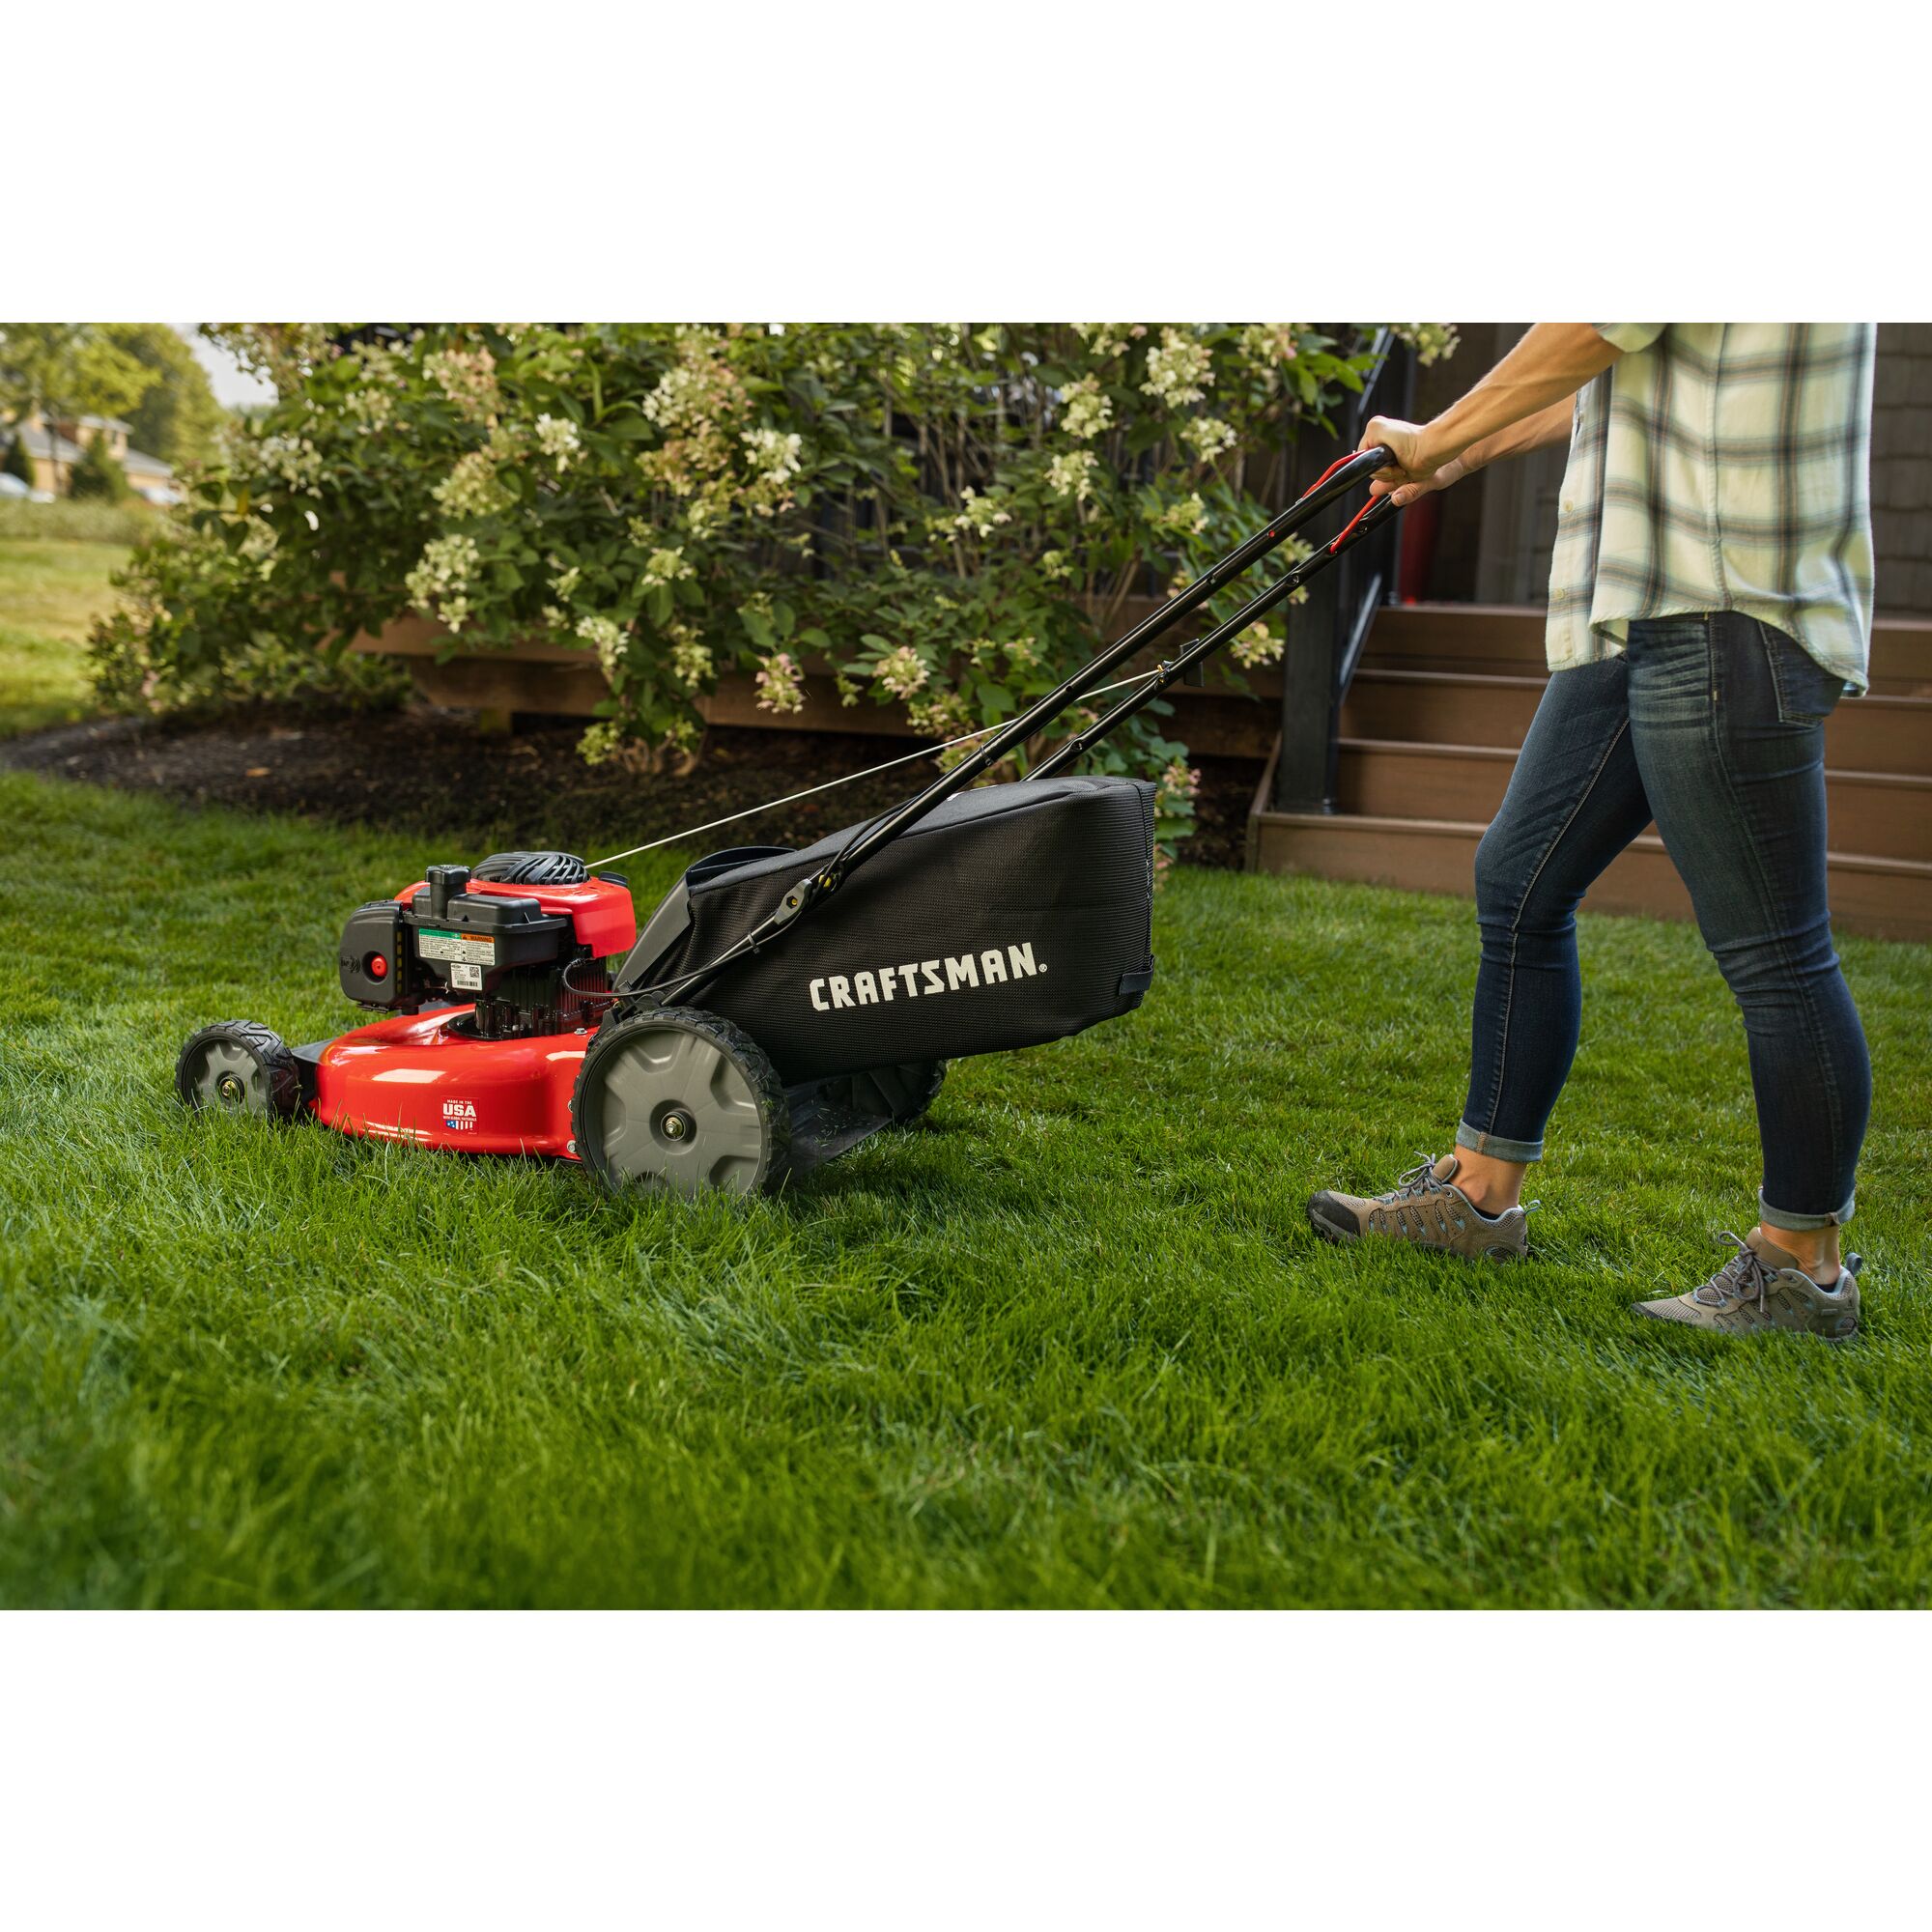 CRAFTSMAN M115 140cc Push Mower in side view mowing the lawn in plaid top and jeans